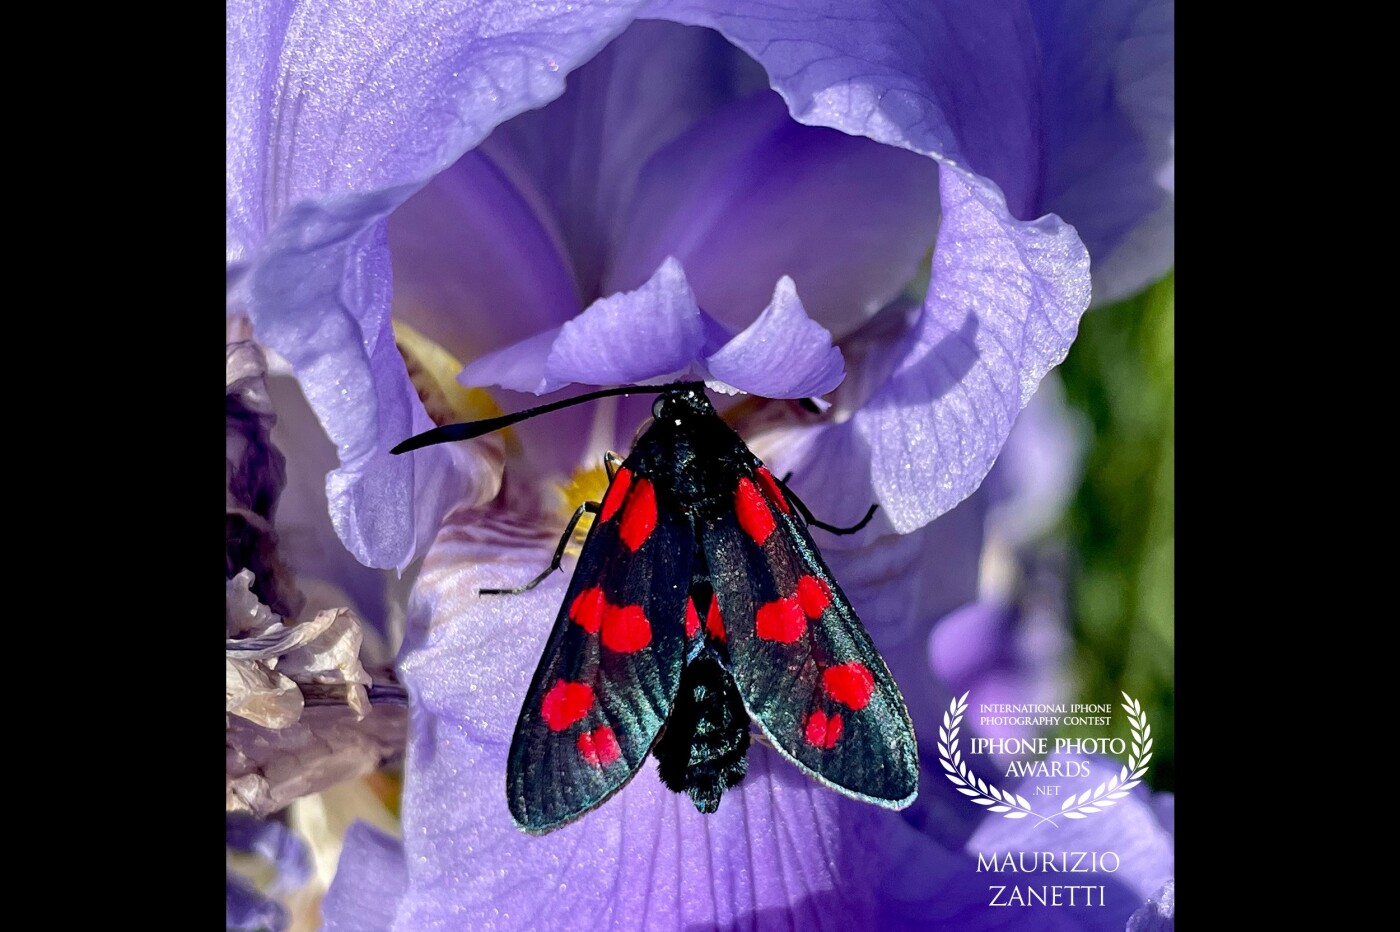 The butterfly is a Zygaena, the flower is an IRIS. No stylist will ever be able to reach with his compositions the wonderful color combinations that nature offers us every day. Just look around. And maybe have a smartphone in your hands...